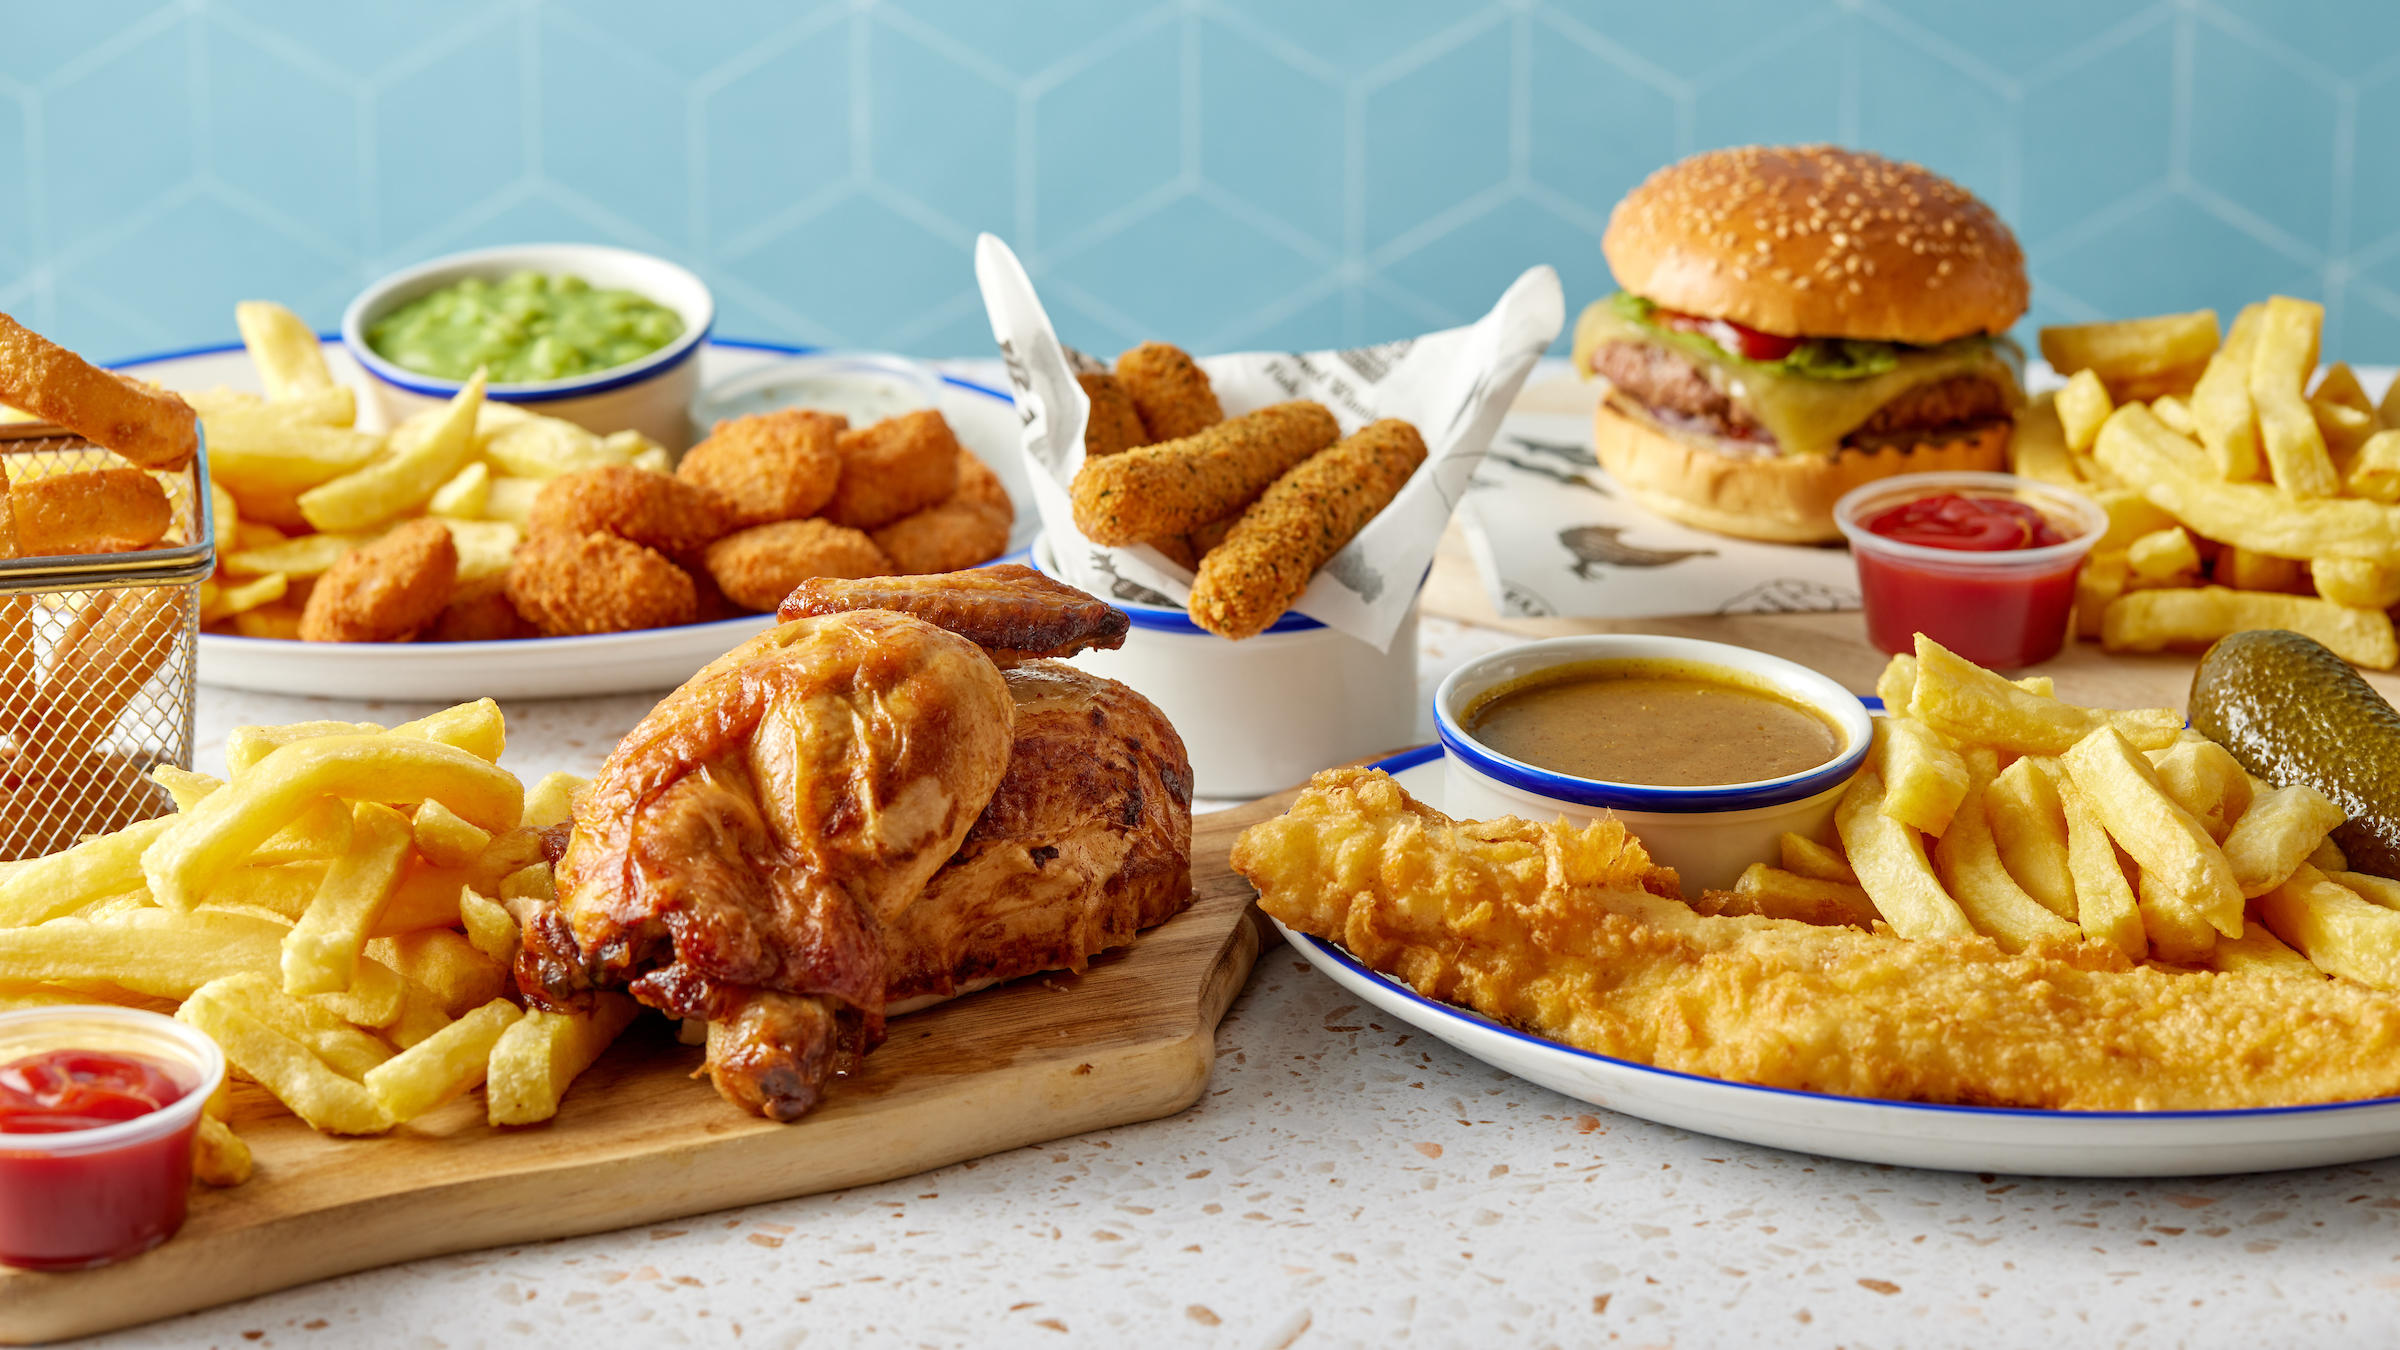 Enjoy fishnchickn your way! Order click & collect through our simple online ordering website, or ord fishnchickn Harold Hill Romford 01708 345723